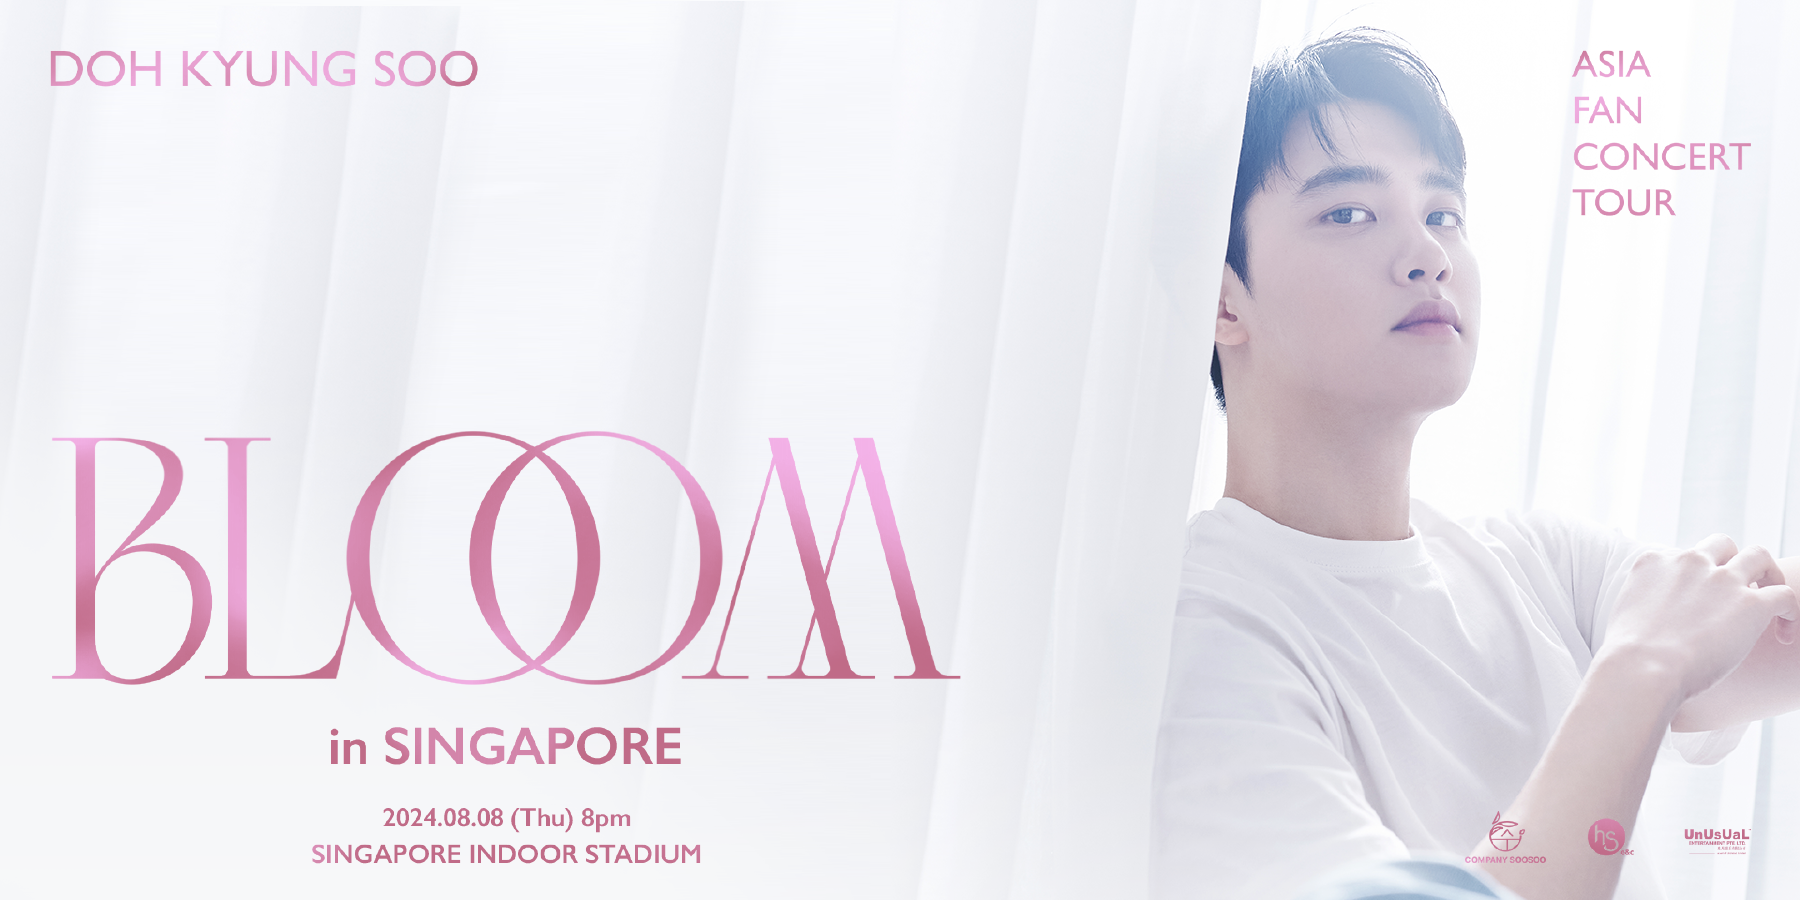 DOH KYUNG SOO ASIA FAN CONCERT TOUR "BLOOM" IN SINGAPORE